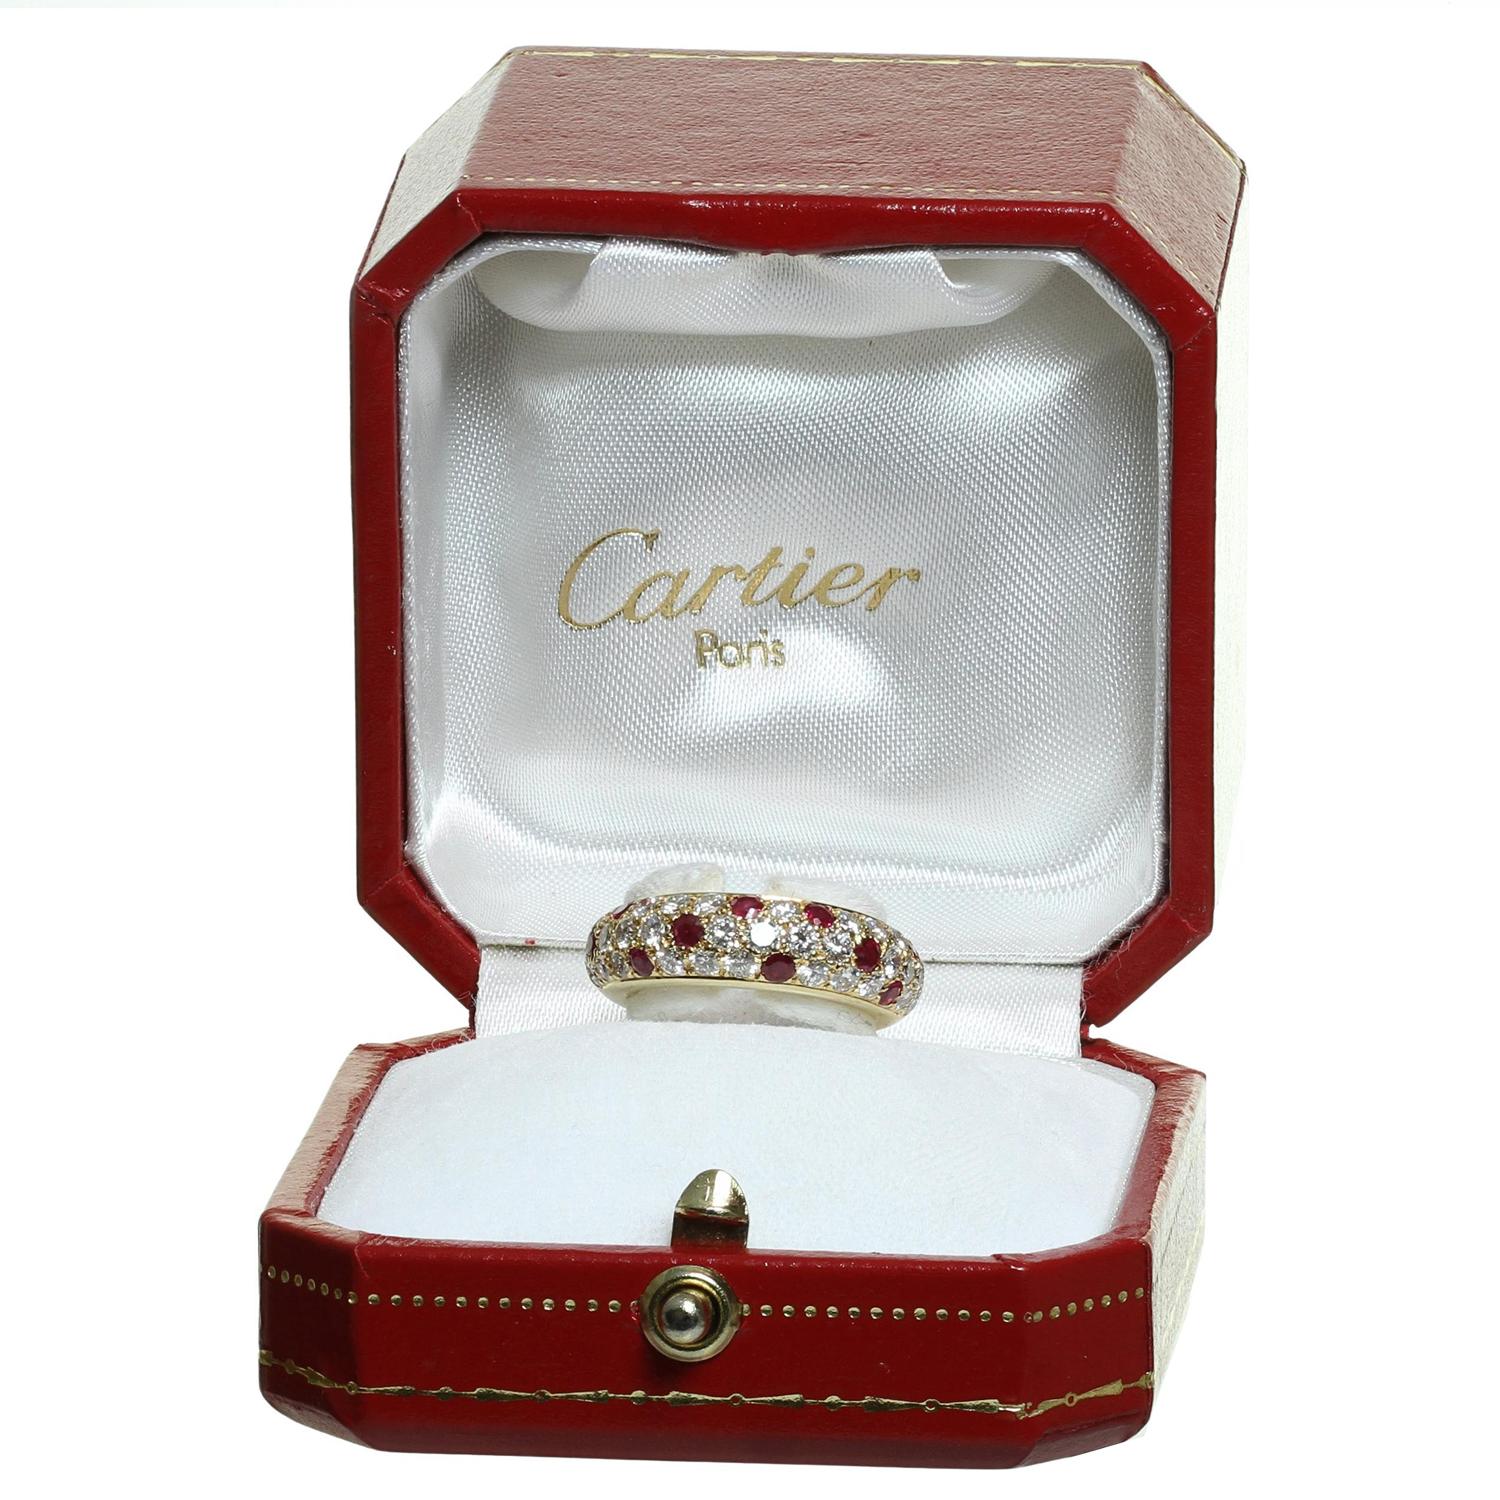 This classic Cartier ring is crafted in 18k yellow gold and pave-set with brilliant-cut round D-F VVS1-VVS2 diamonds weighing an estimated 1.36 carats and round red rubies weighing an estimated 0.60 carats. Made in France circa 1994. Measurements: